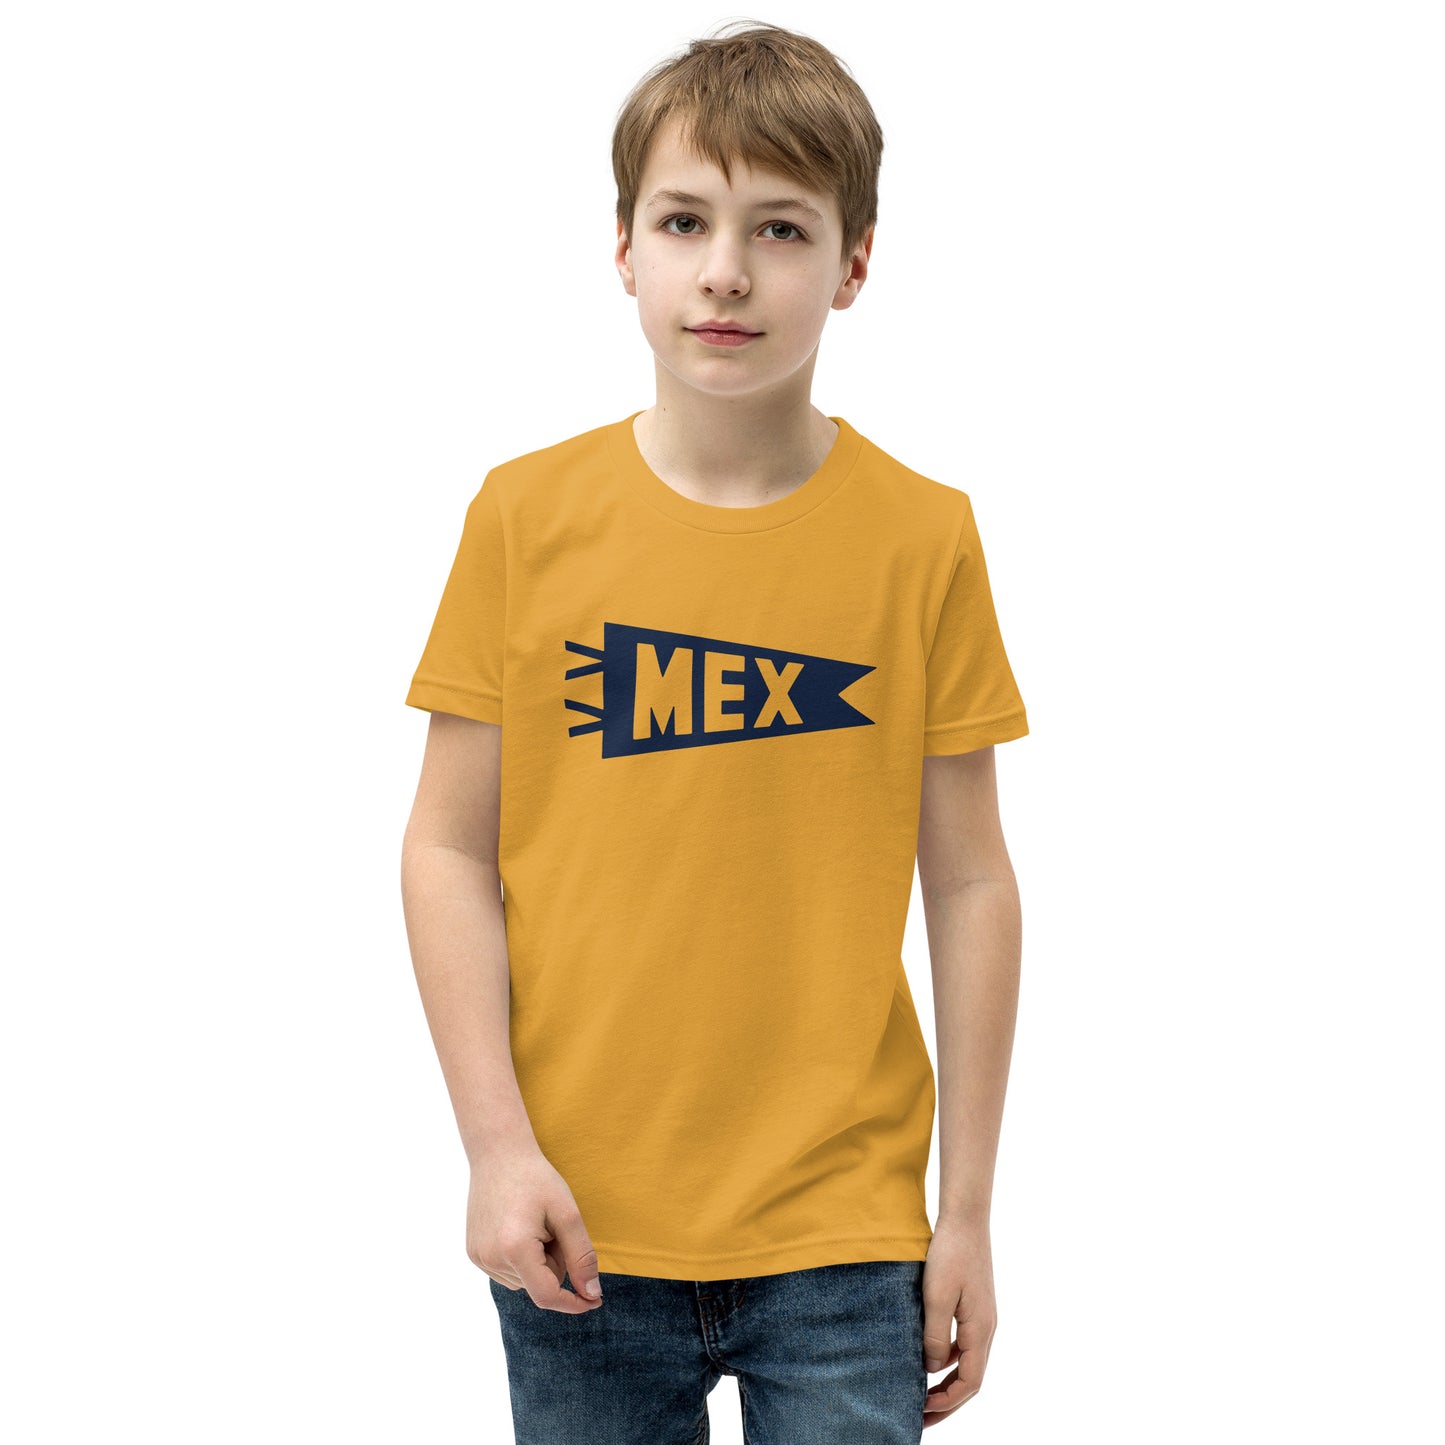 Kid's Airport Code Tee - Navy Blue Graphic • MEX Mexico City • YHM Designs - Image 08